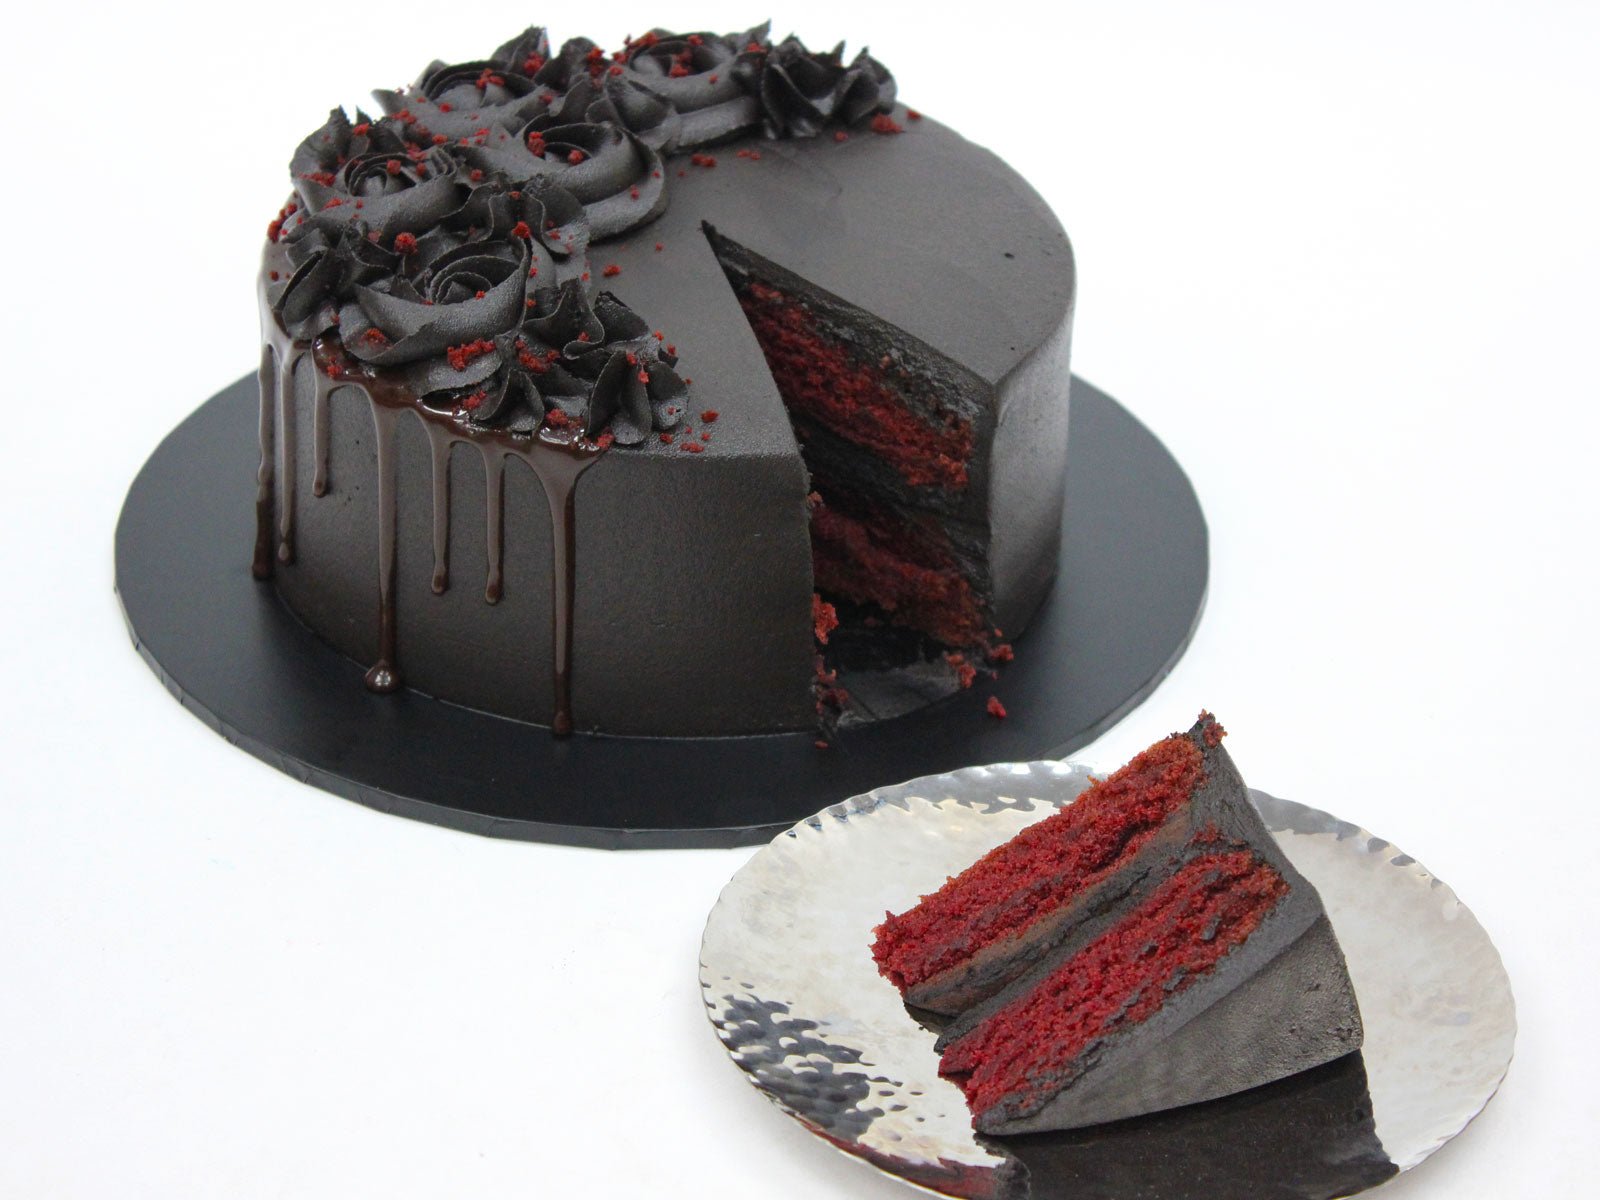 Midnight Cake Delivery - Cake Delivery At Midnight Across India - BGF